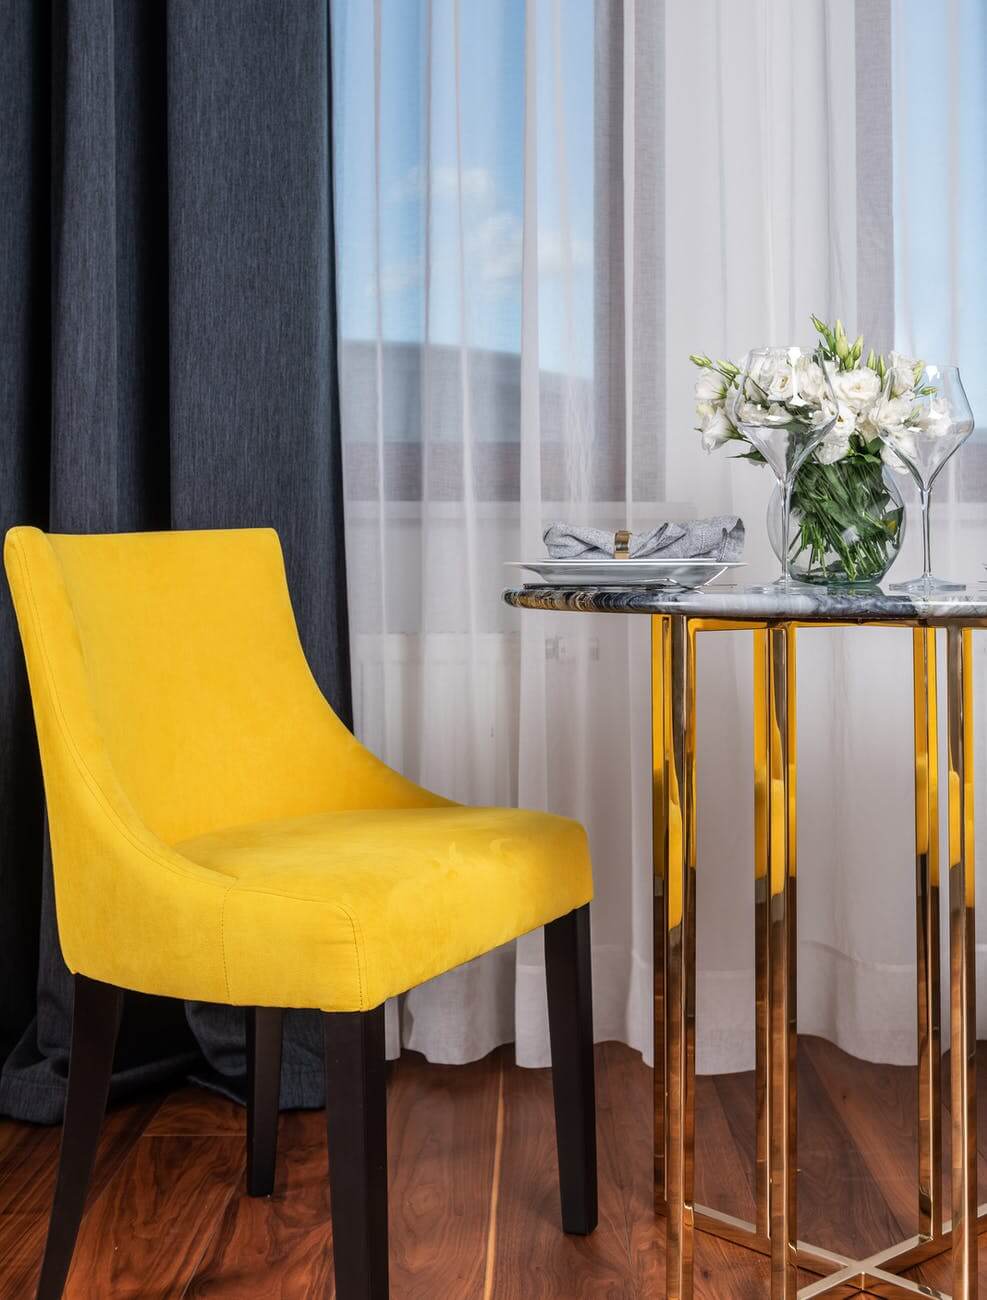 living room interior with stylish yellow chair and table